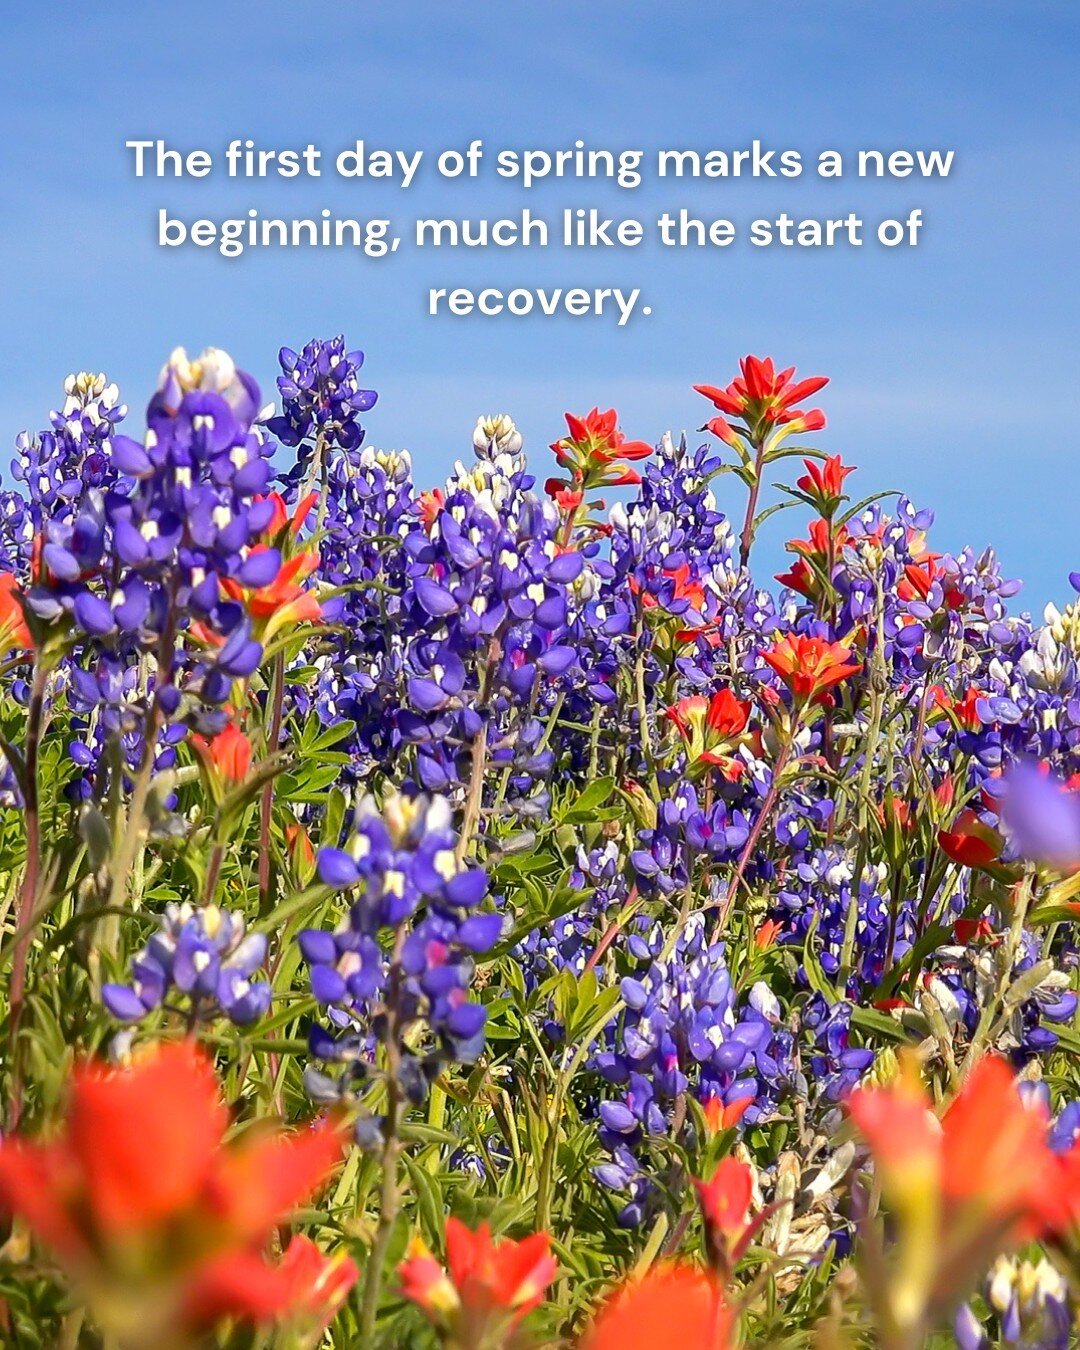 Happy First Day of Spring! As nature begins its cycle of renewal and growth, it's a great reminder of the fresh start that's available to us all.

#FirstDayofSpring #renewal #growth #freshstart #newbeginnings #springtime #positivity #optimism